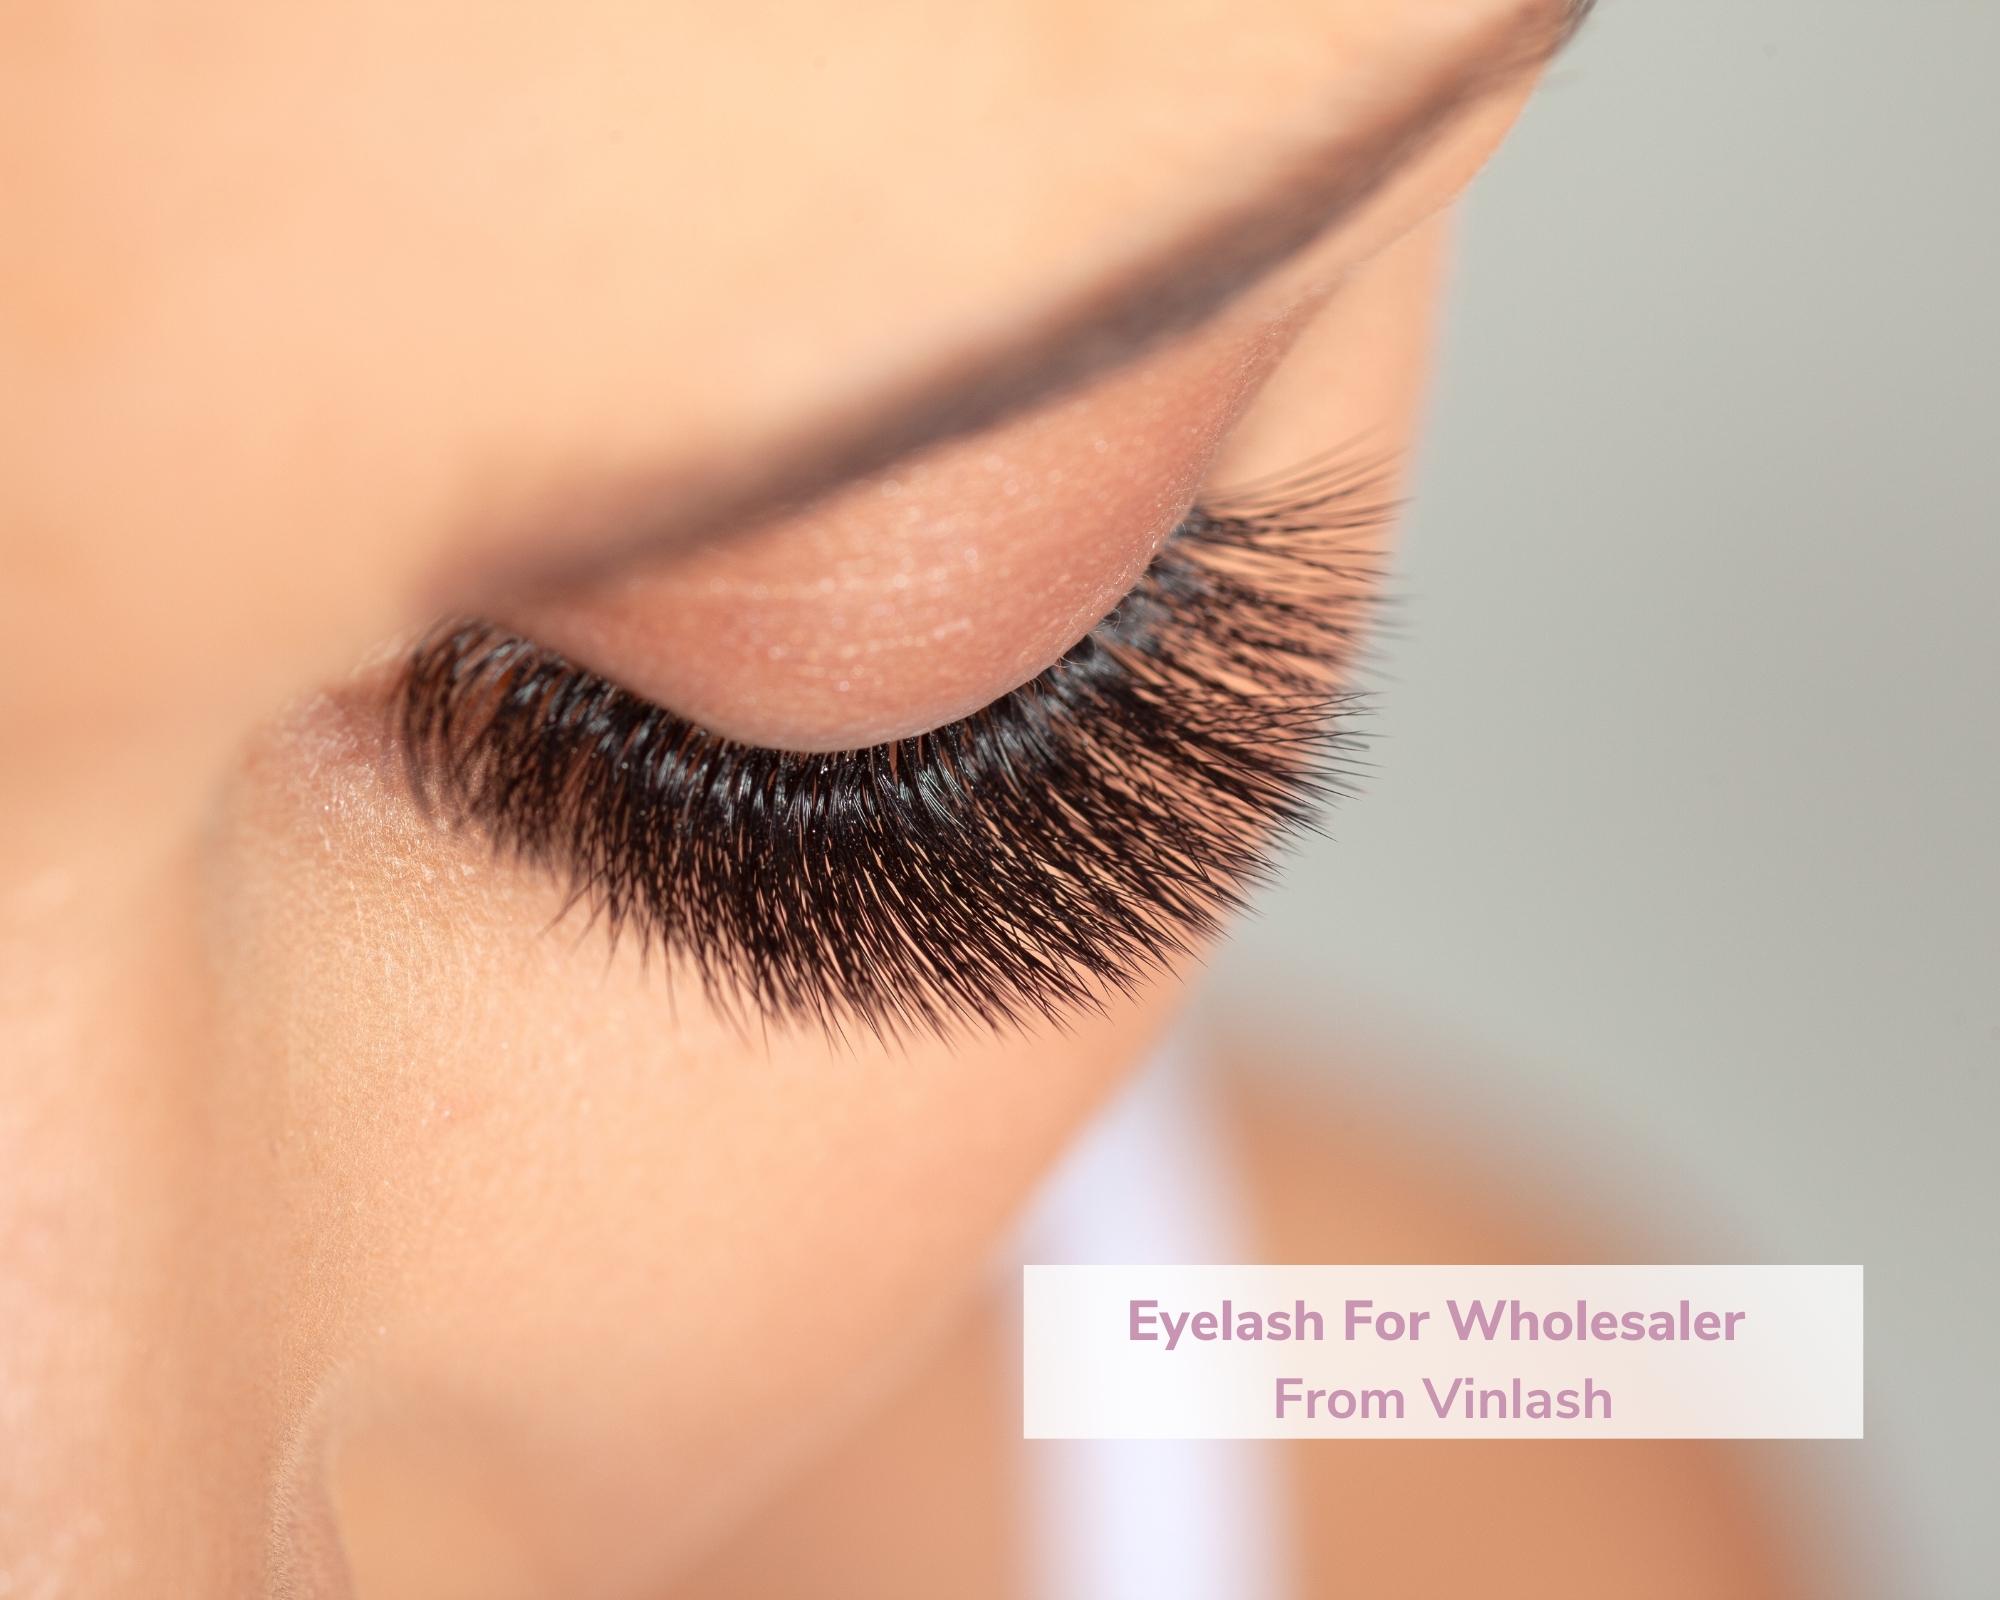 Some-recommended-lash-serum-after-doing-a-lash-extension-12